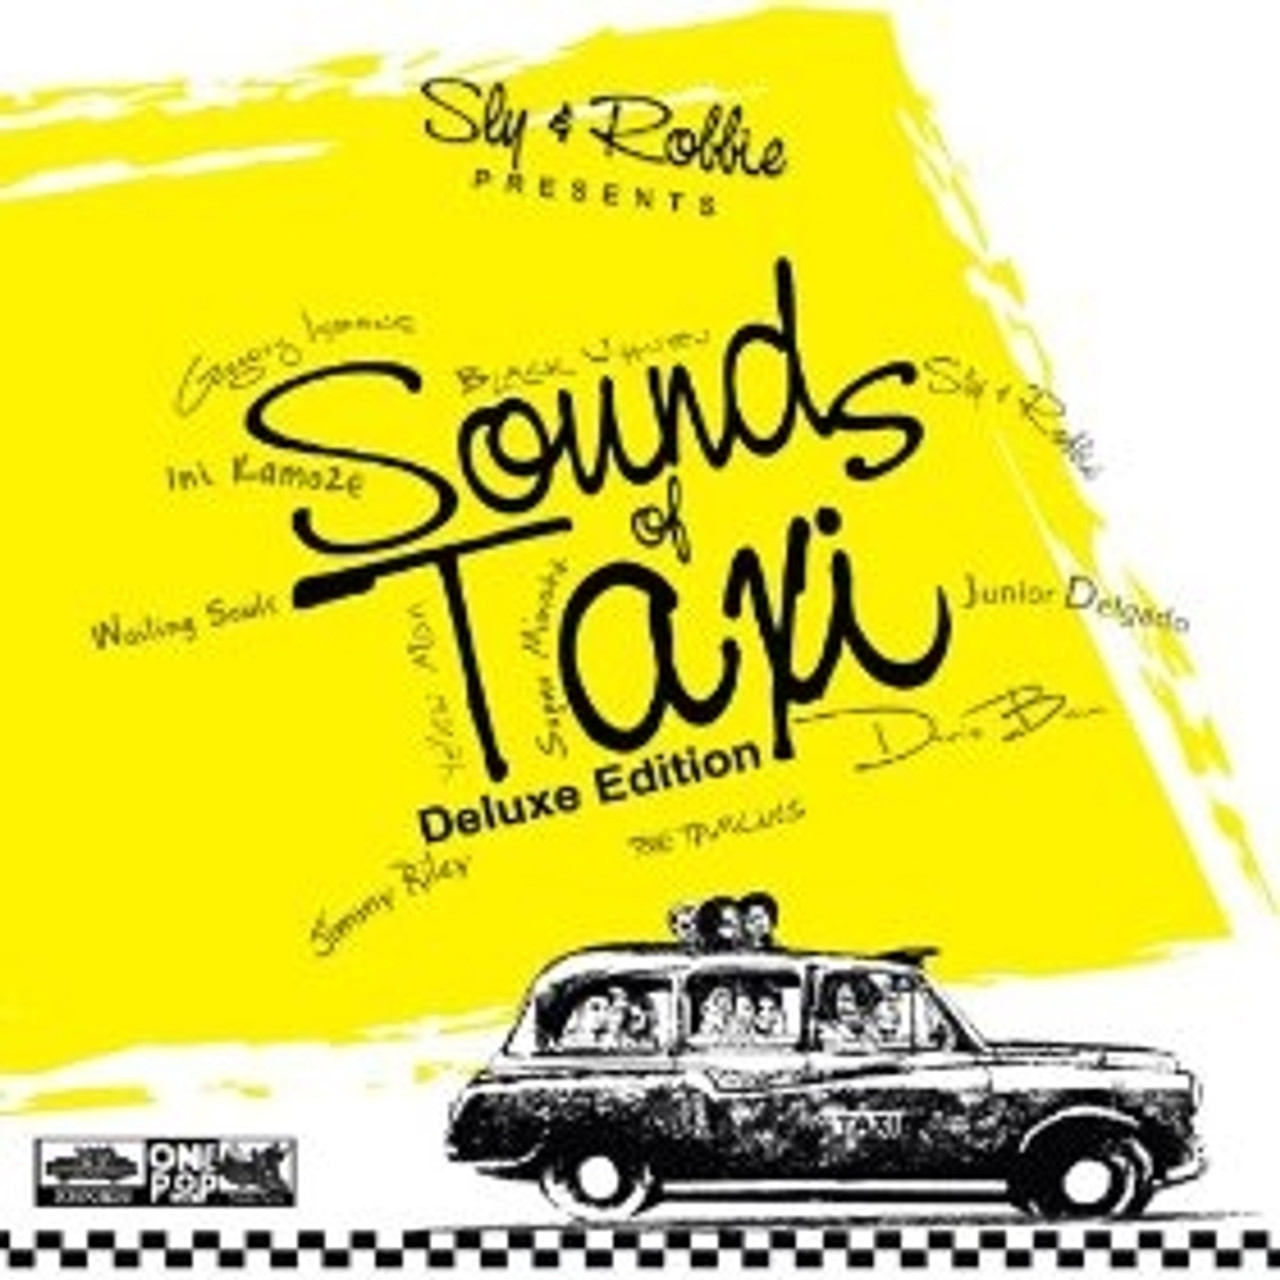 Sounds Of Taxi Deluxe Edition / Sly & Robbie